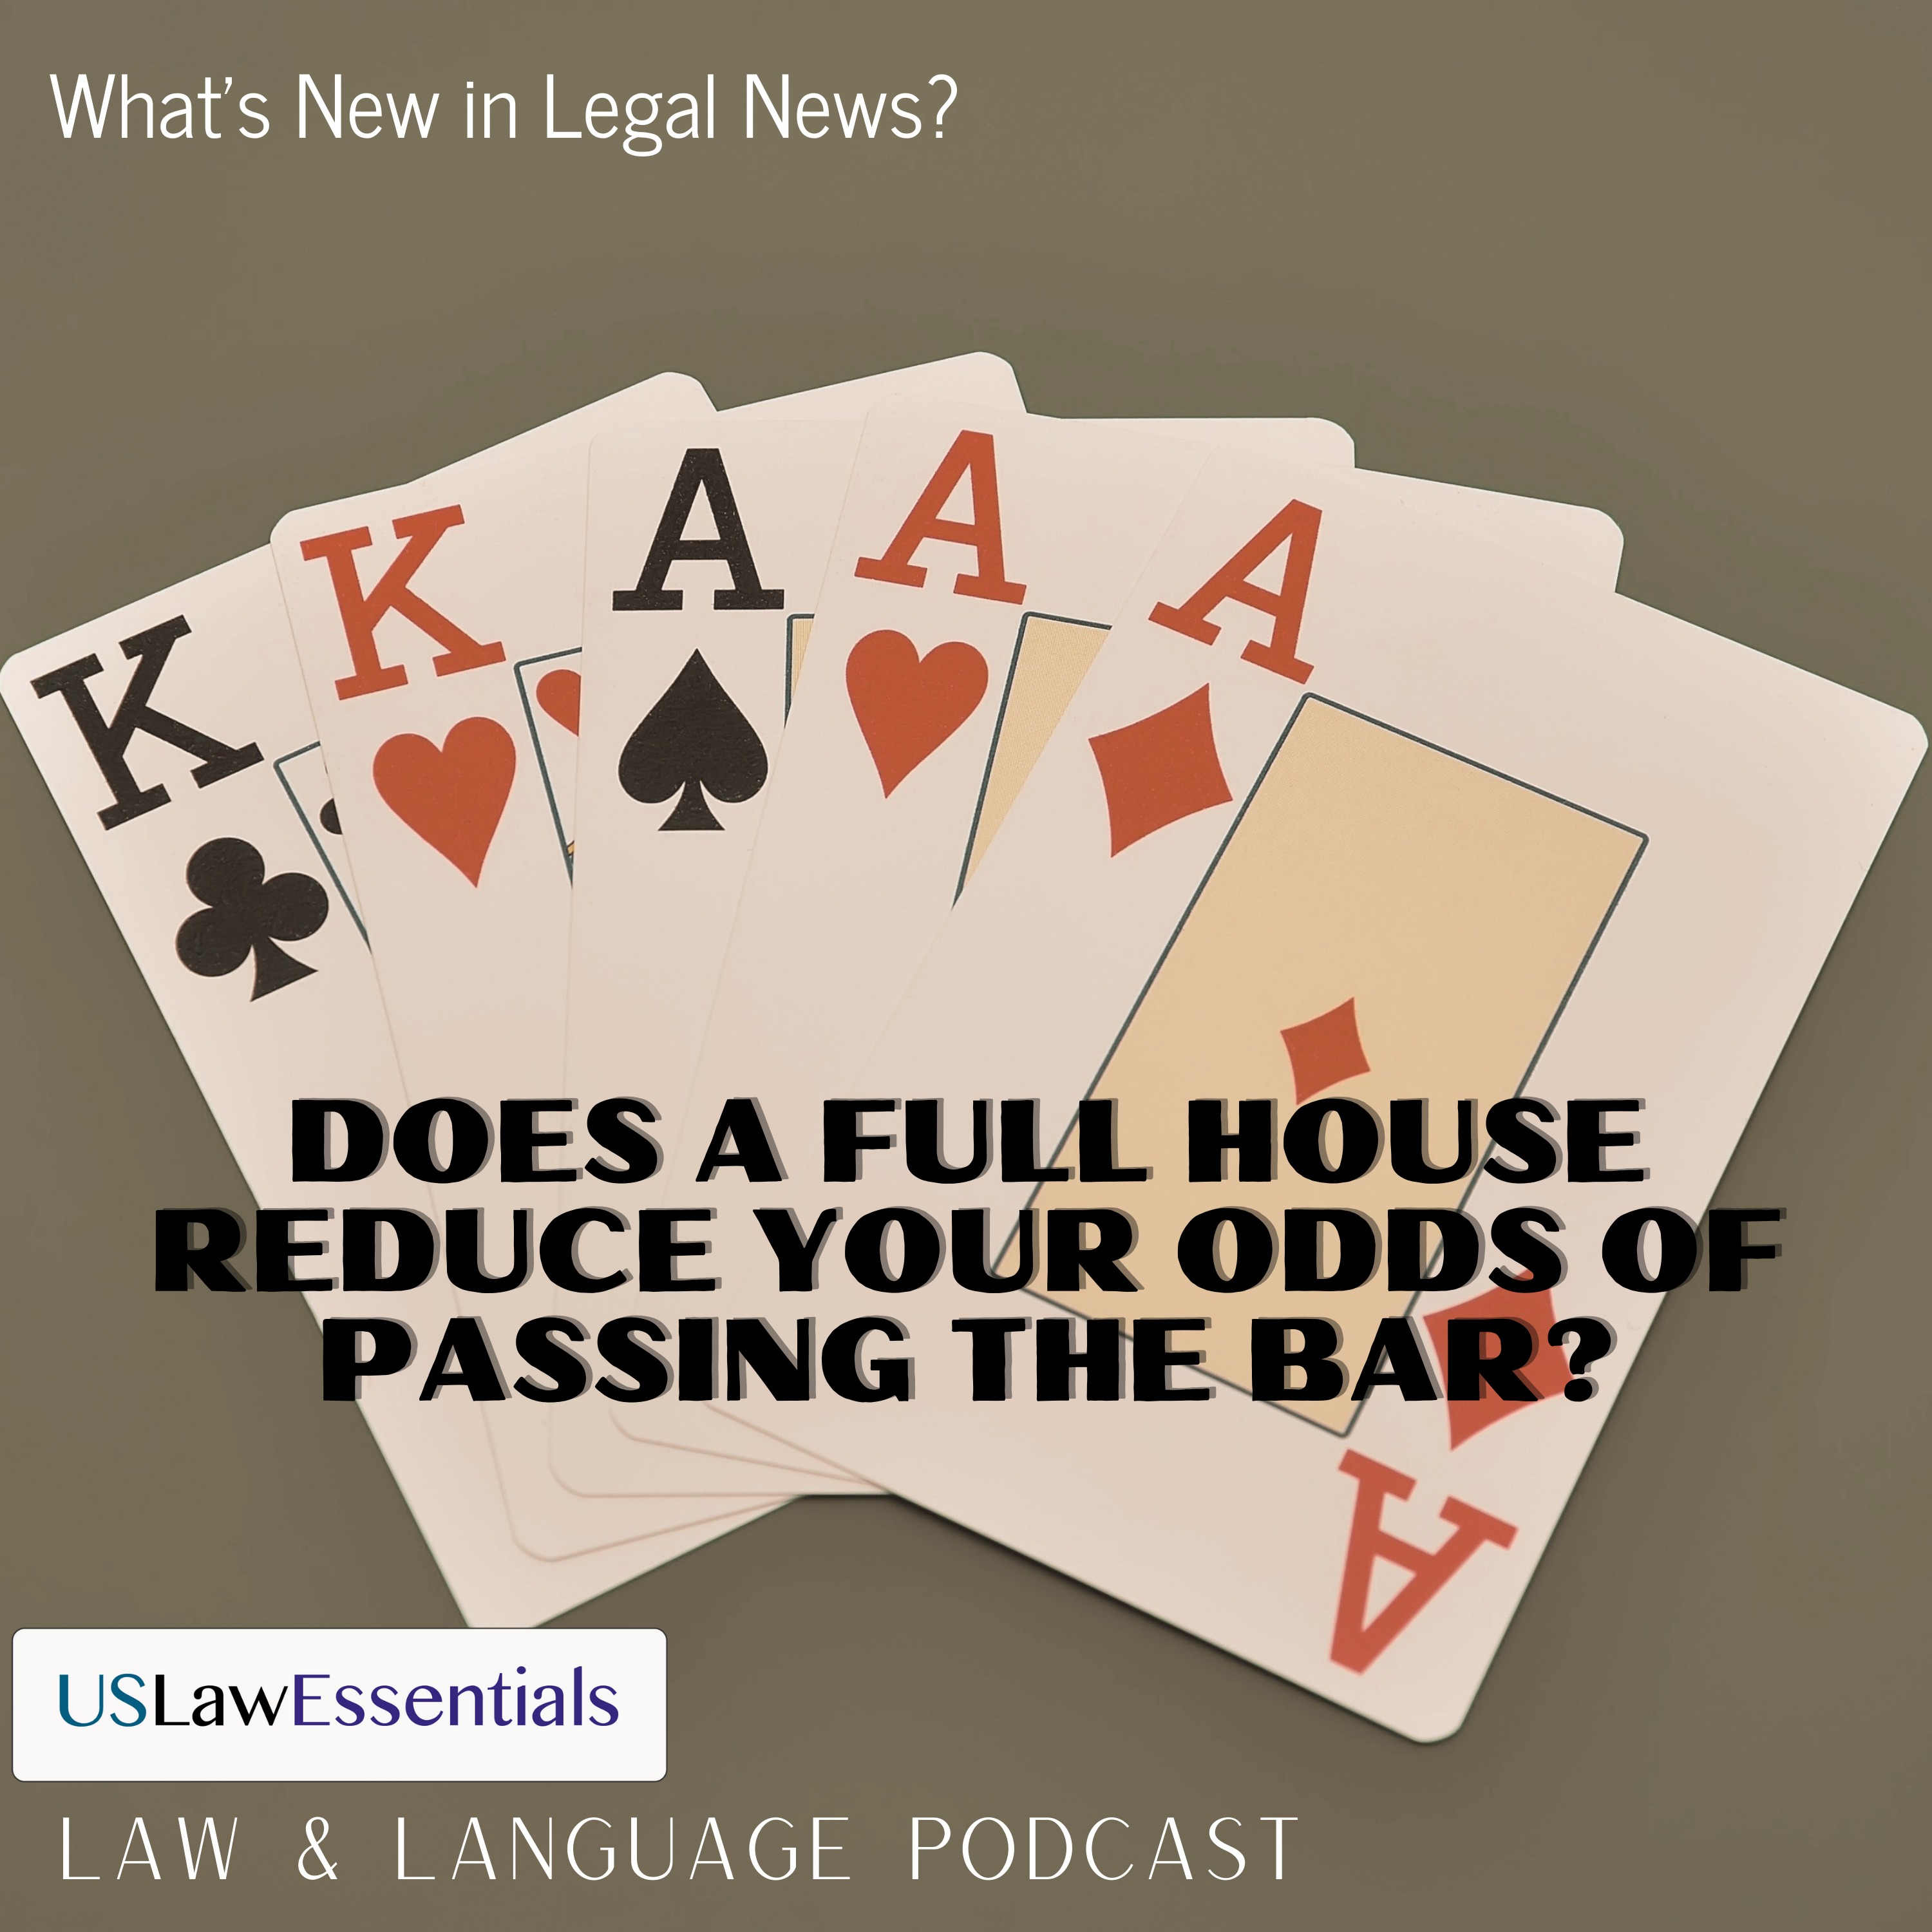 What's New in Legal News: Does a Full House Reduce Your Odds of Passing the Bar?